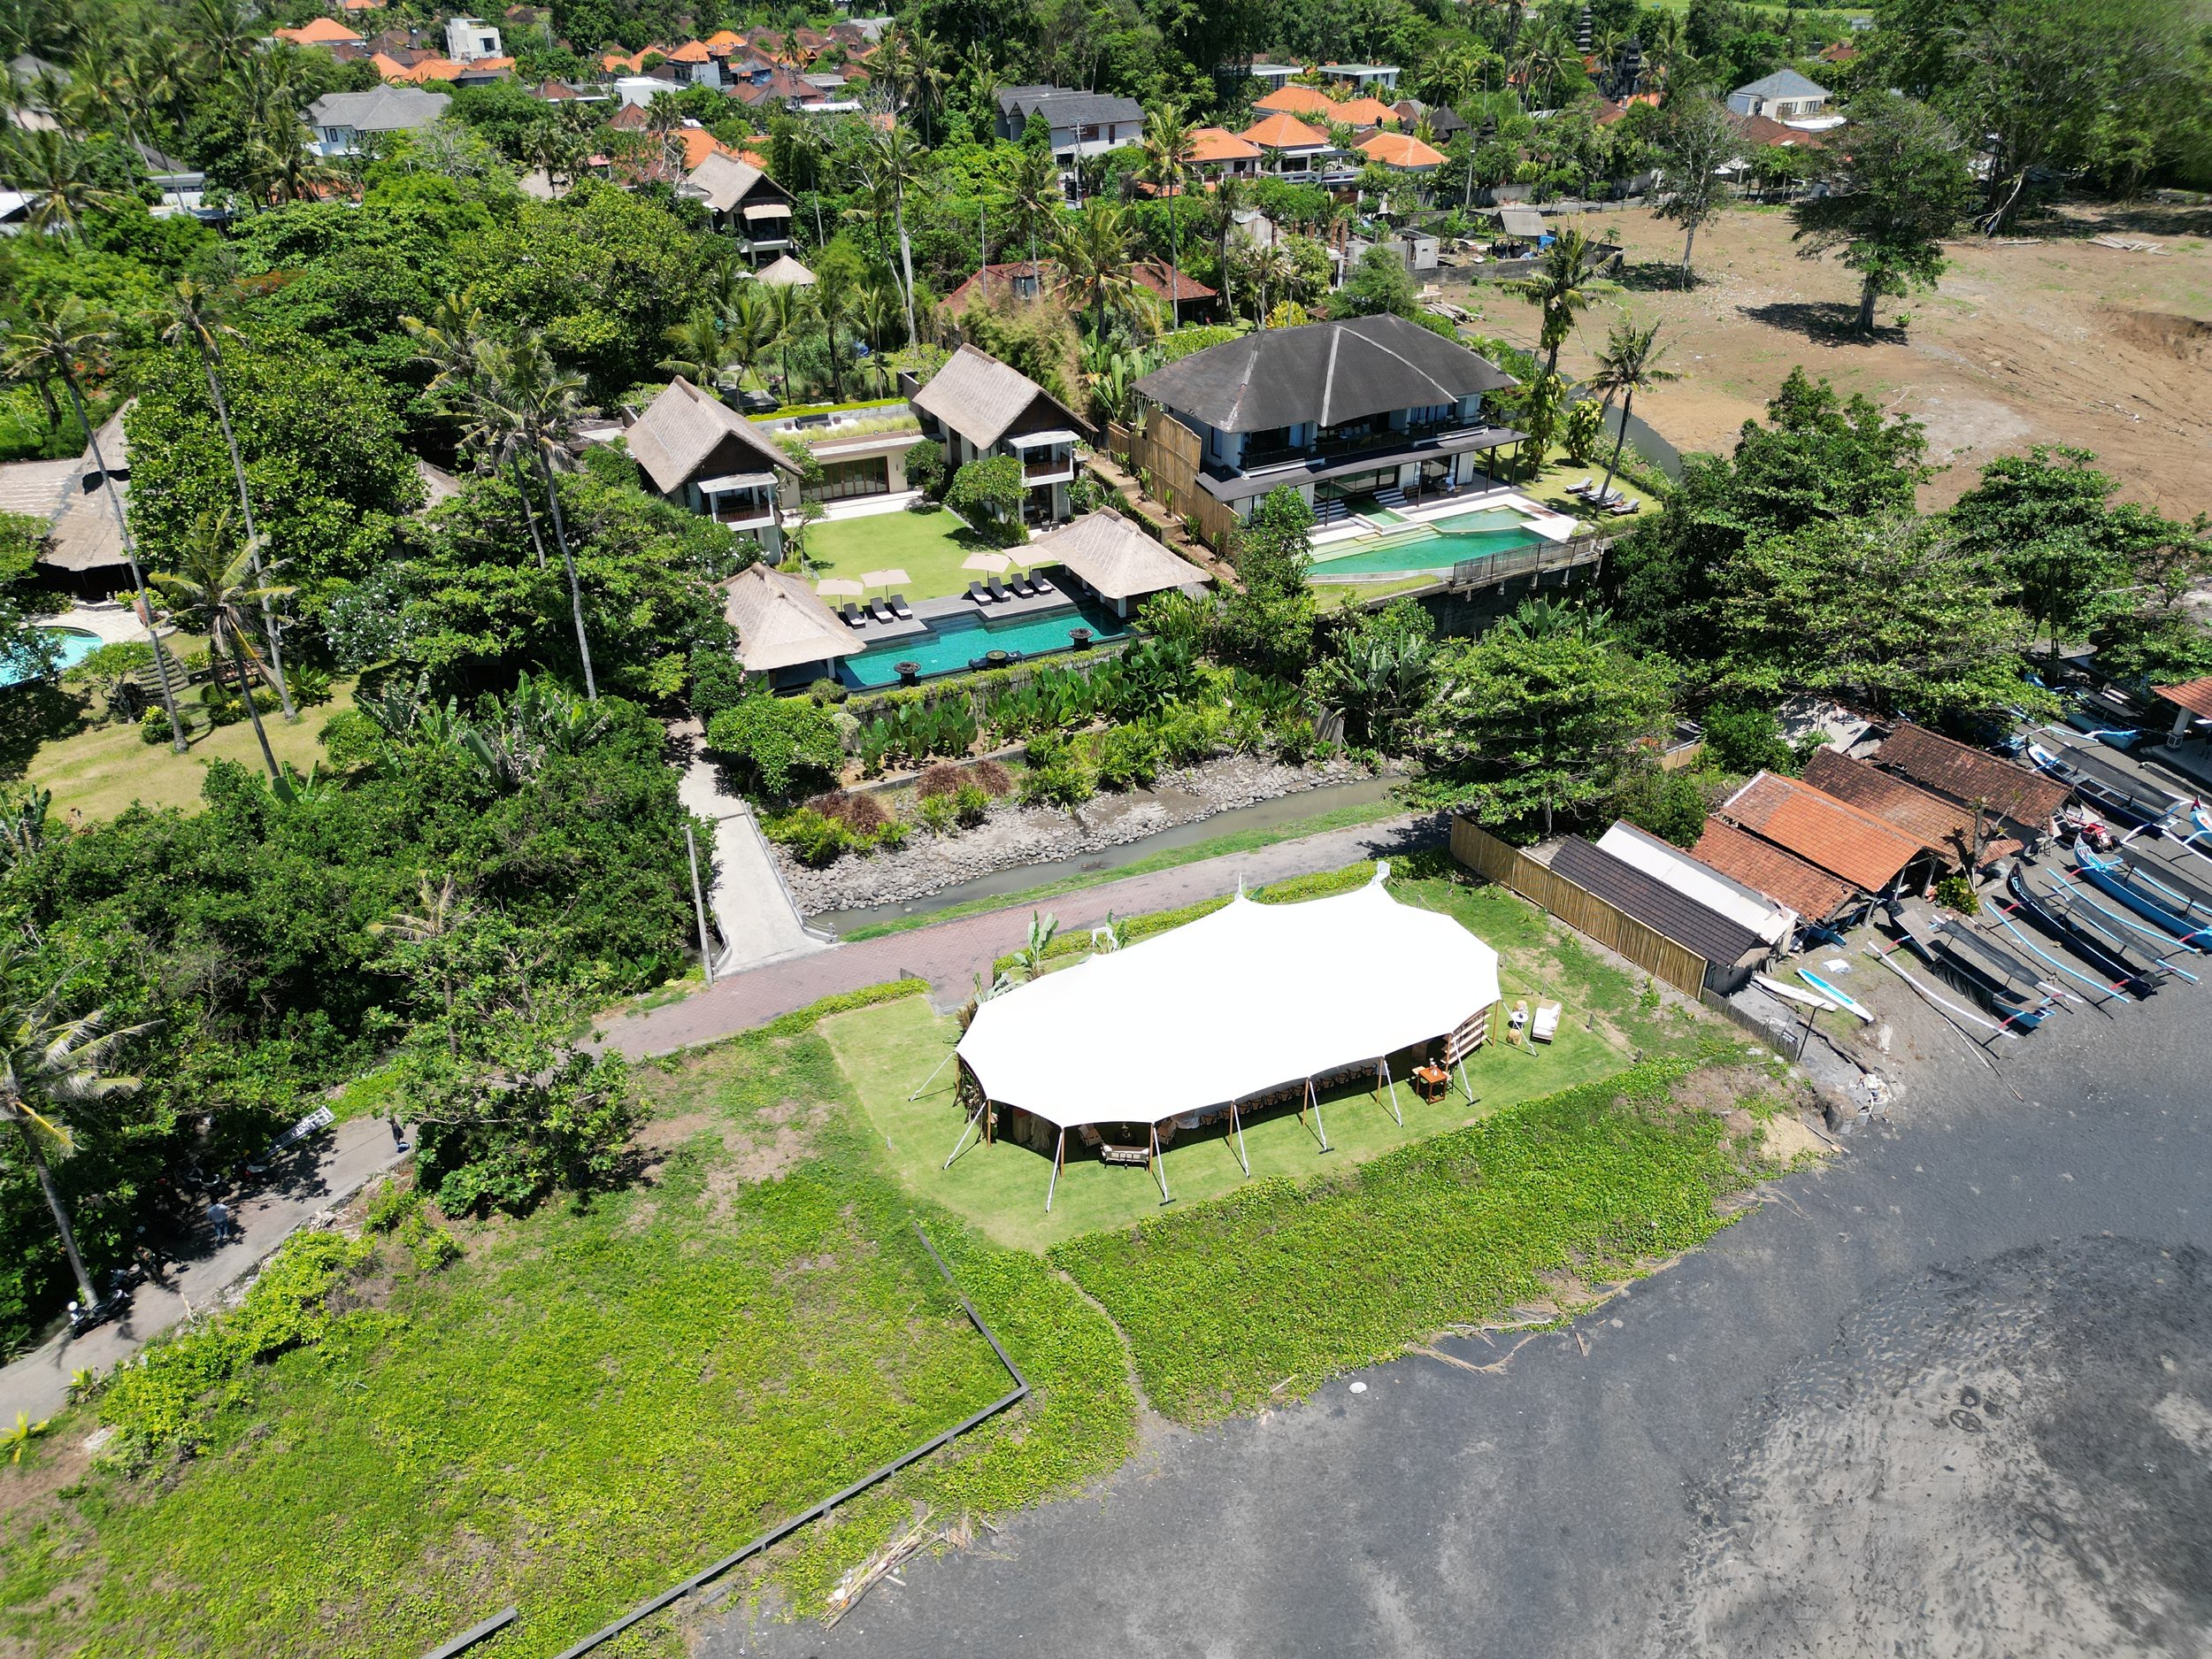 Overview of Seseh Beach Villas, Image from A Tent in Bali